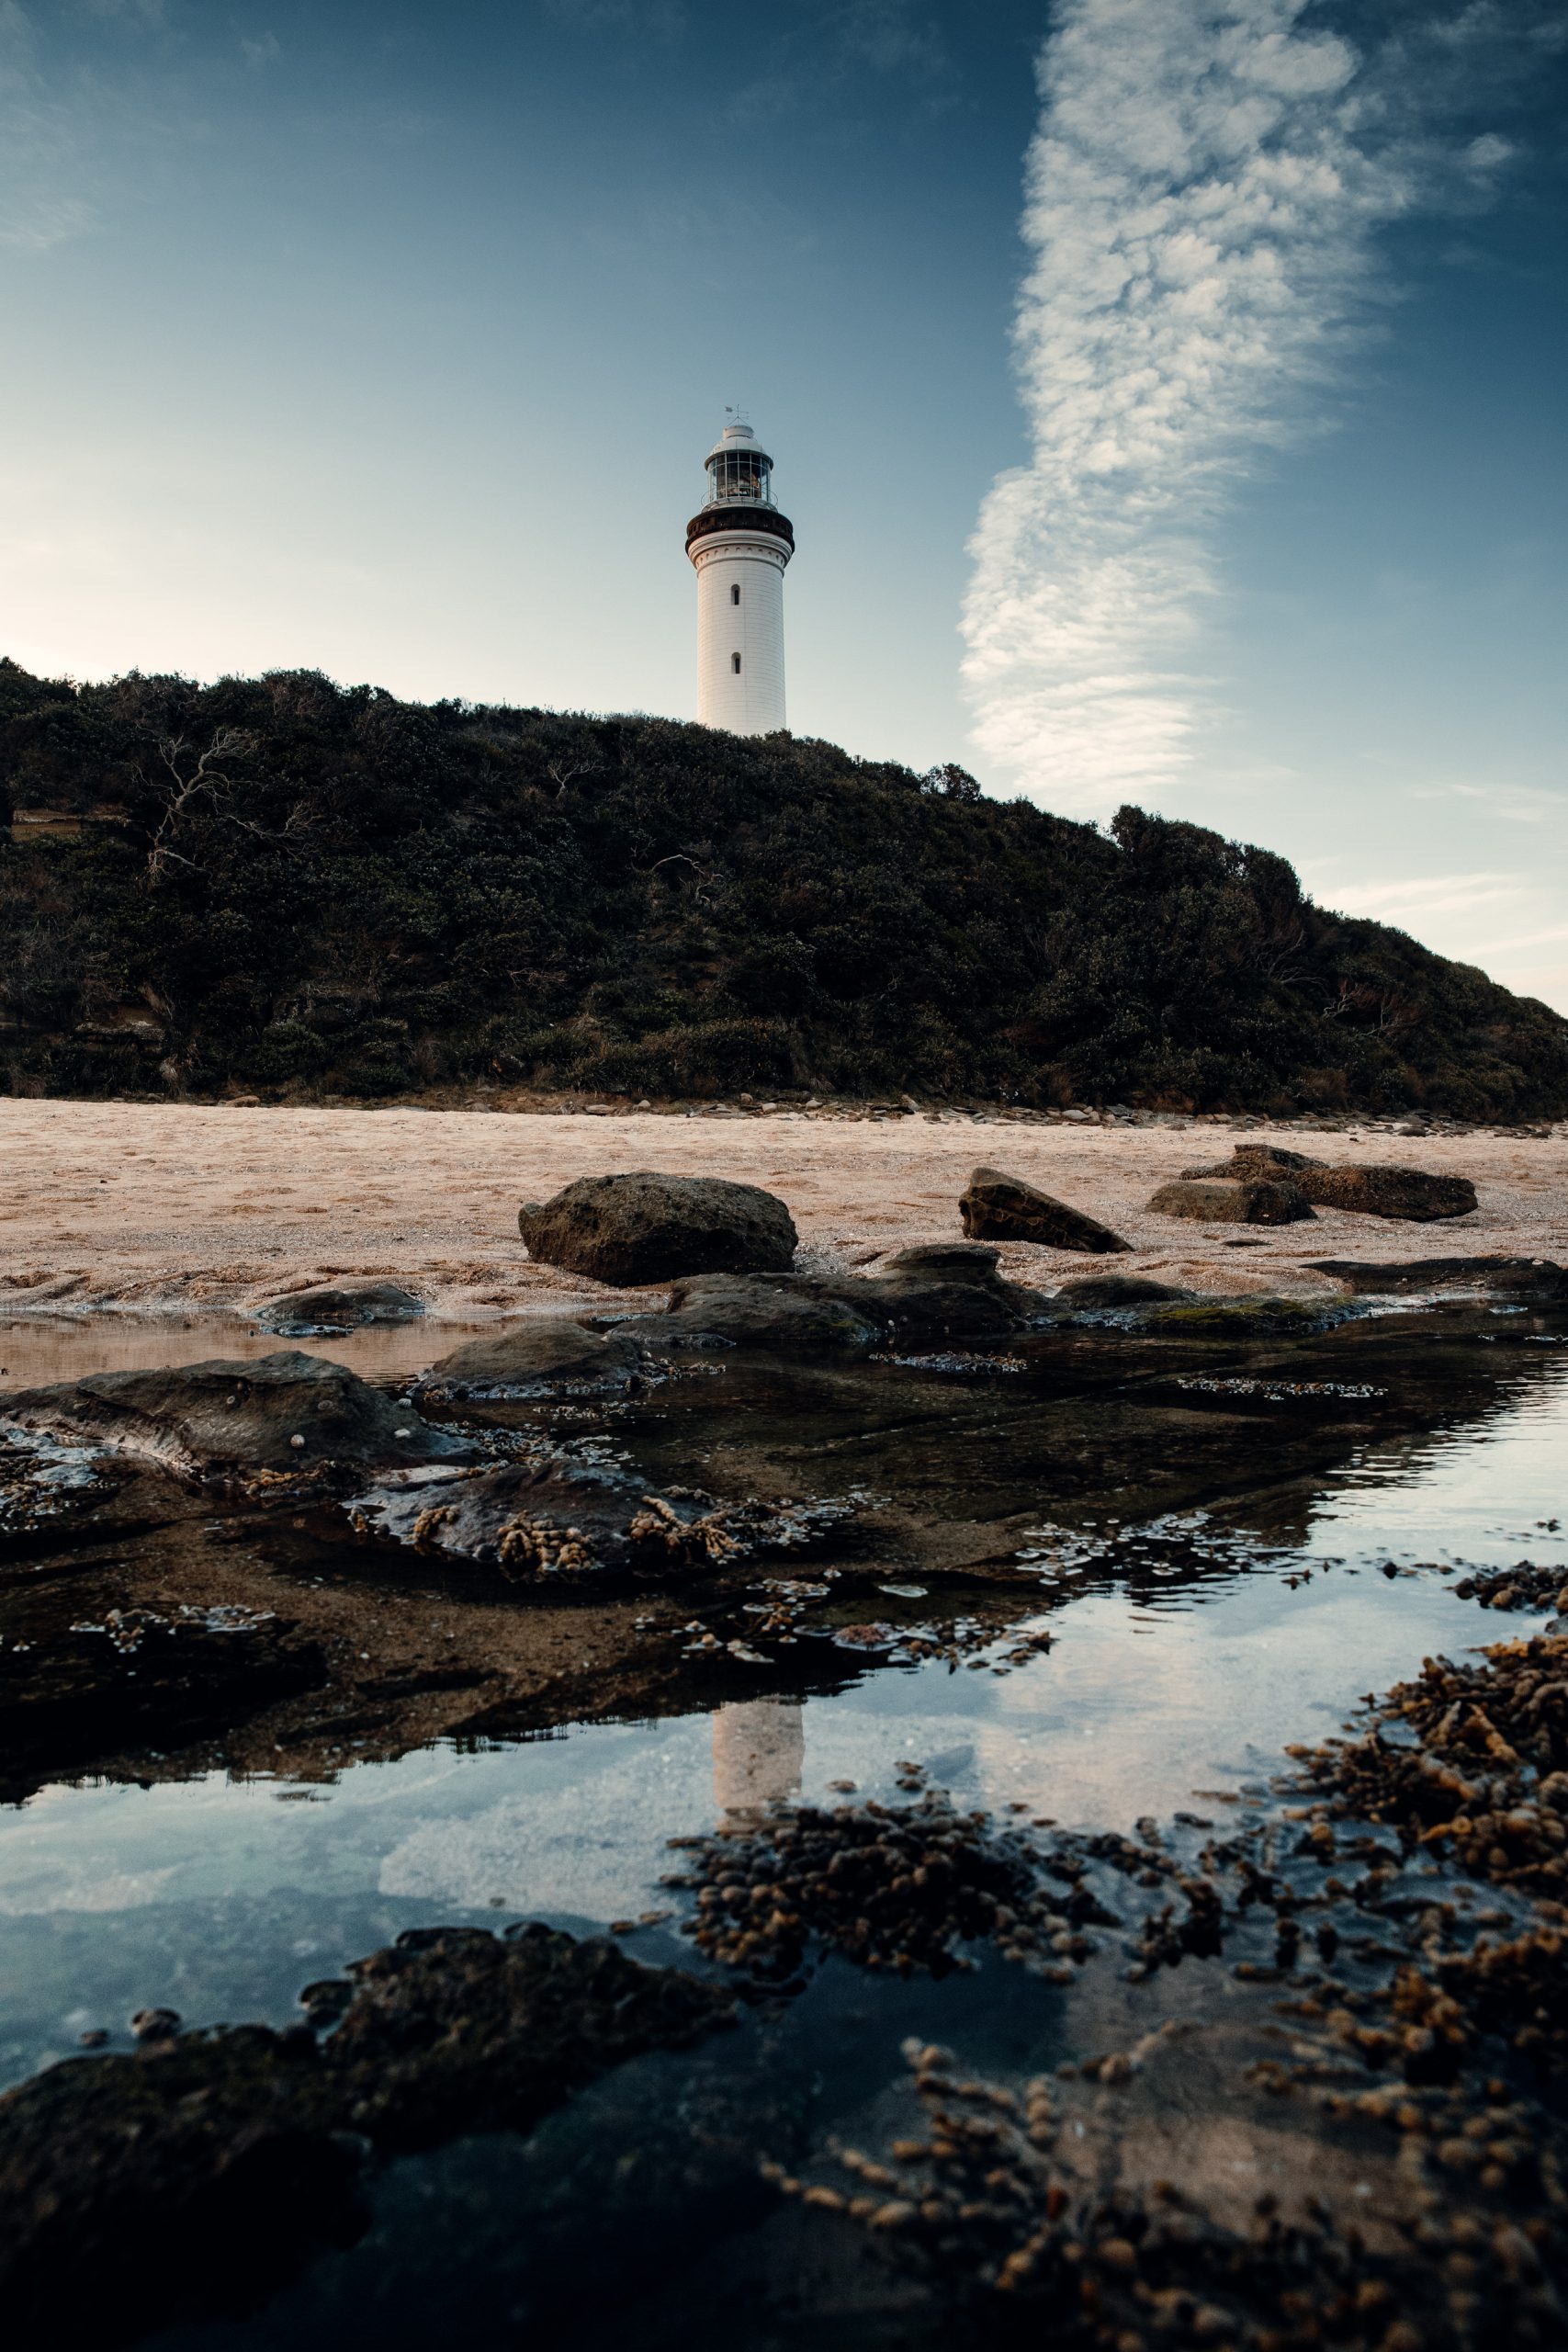 Norah head lighthouse viewed from the beach reflecting in rock pools